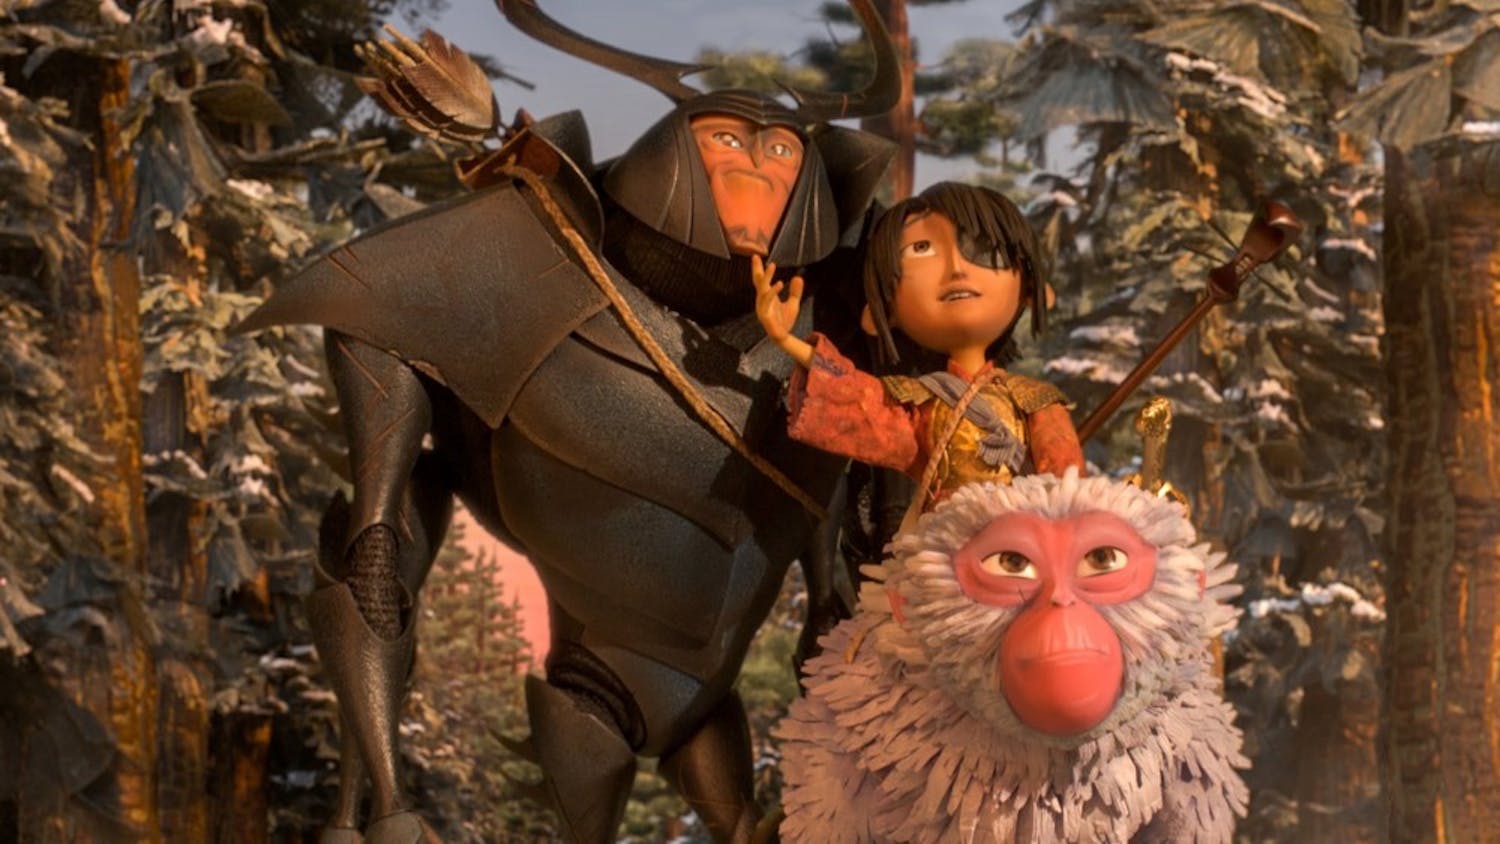 A still from "Kubo and the Two Strings." (Focus Features)